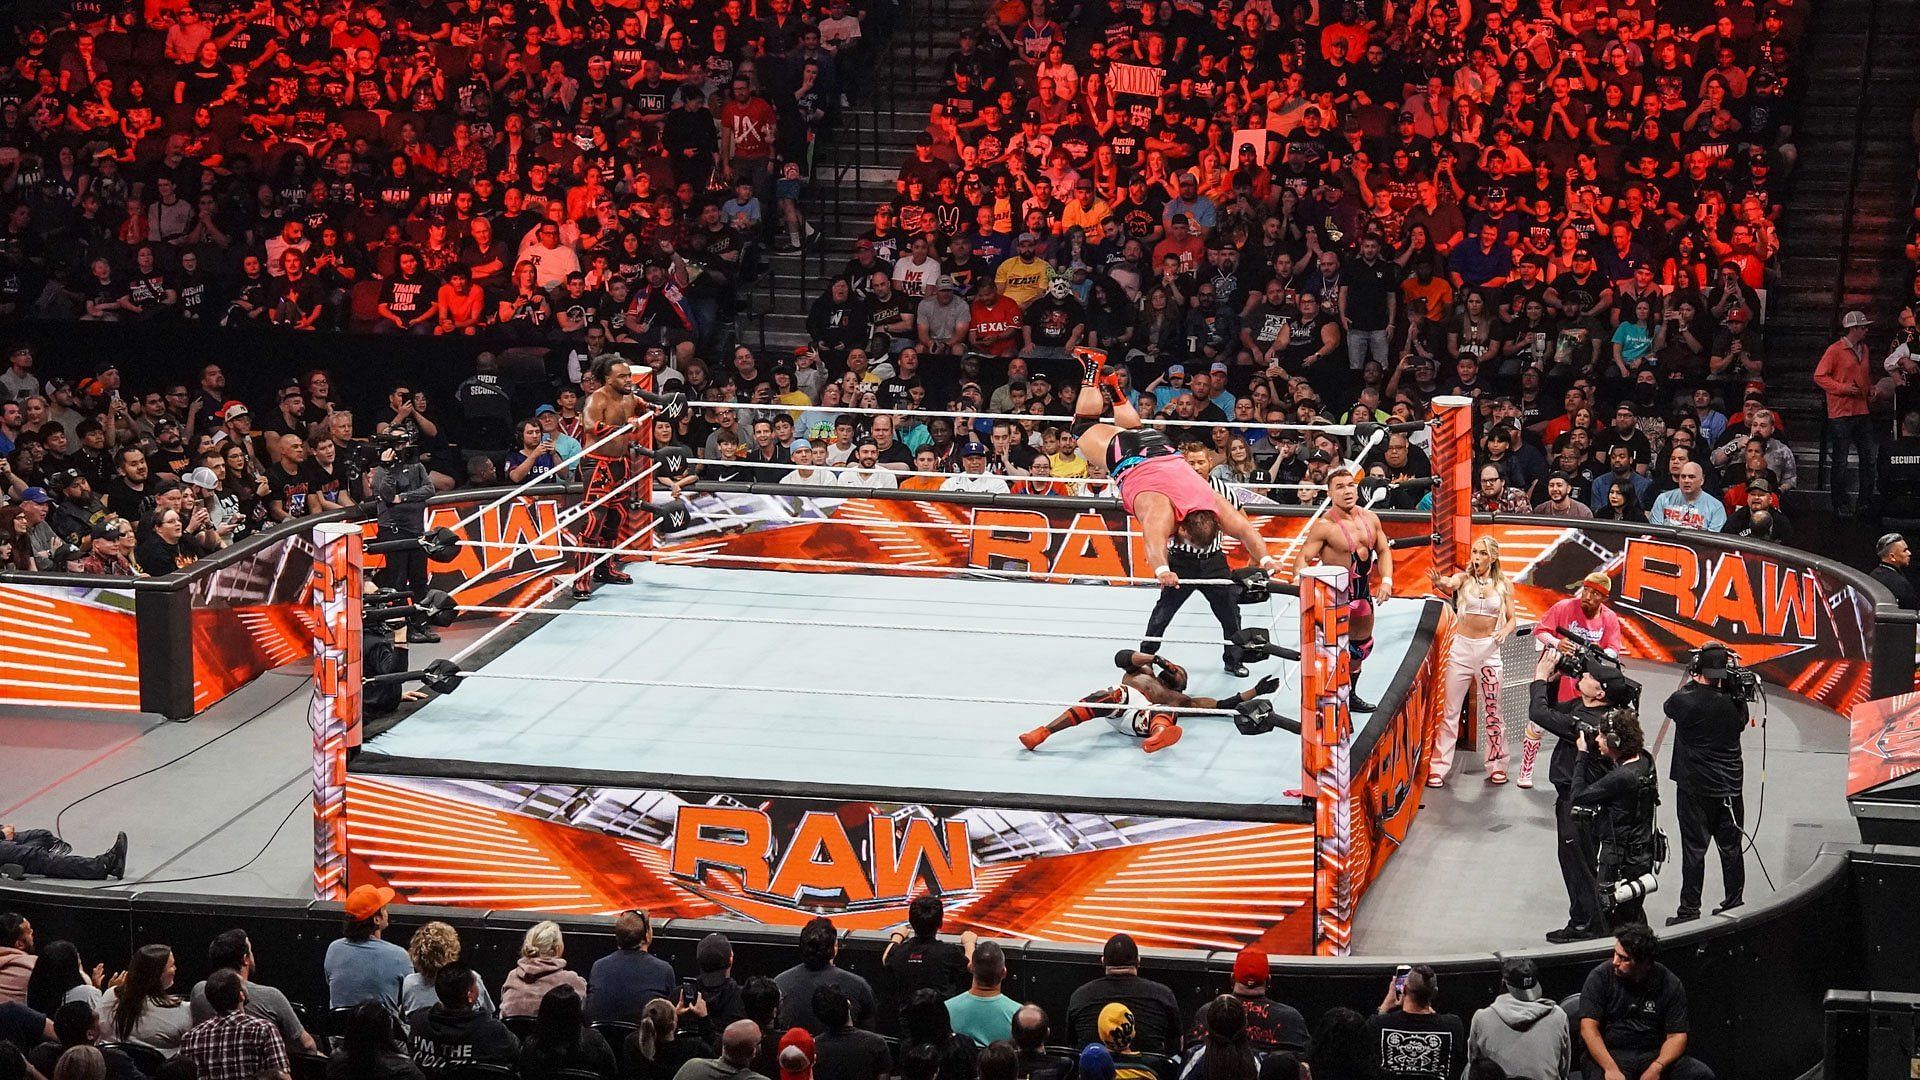 The WWE Universe watches in-ring RAW action from a packed arena